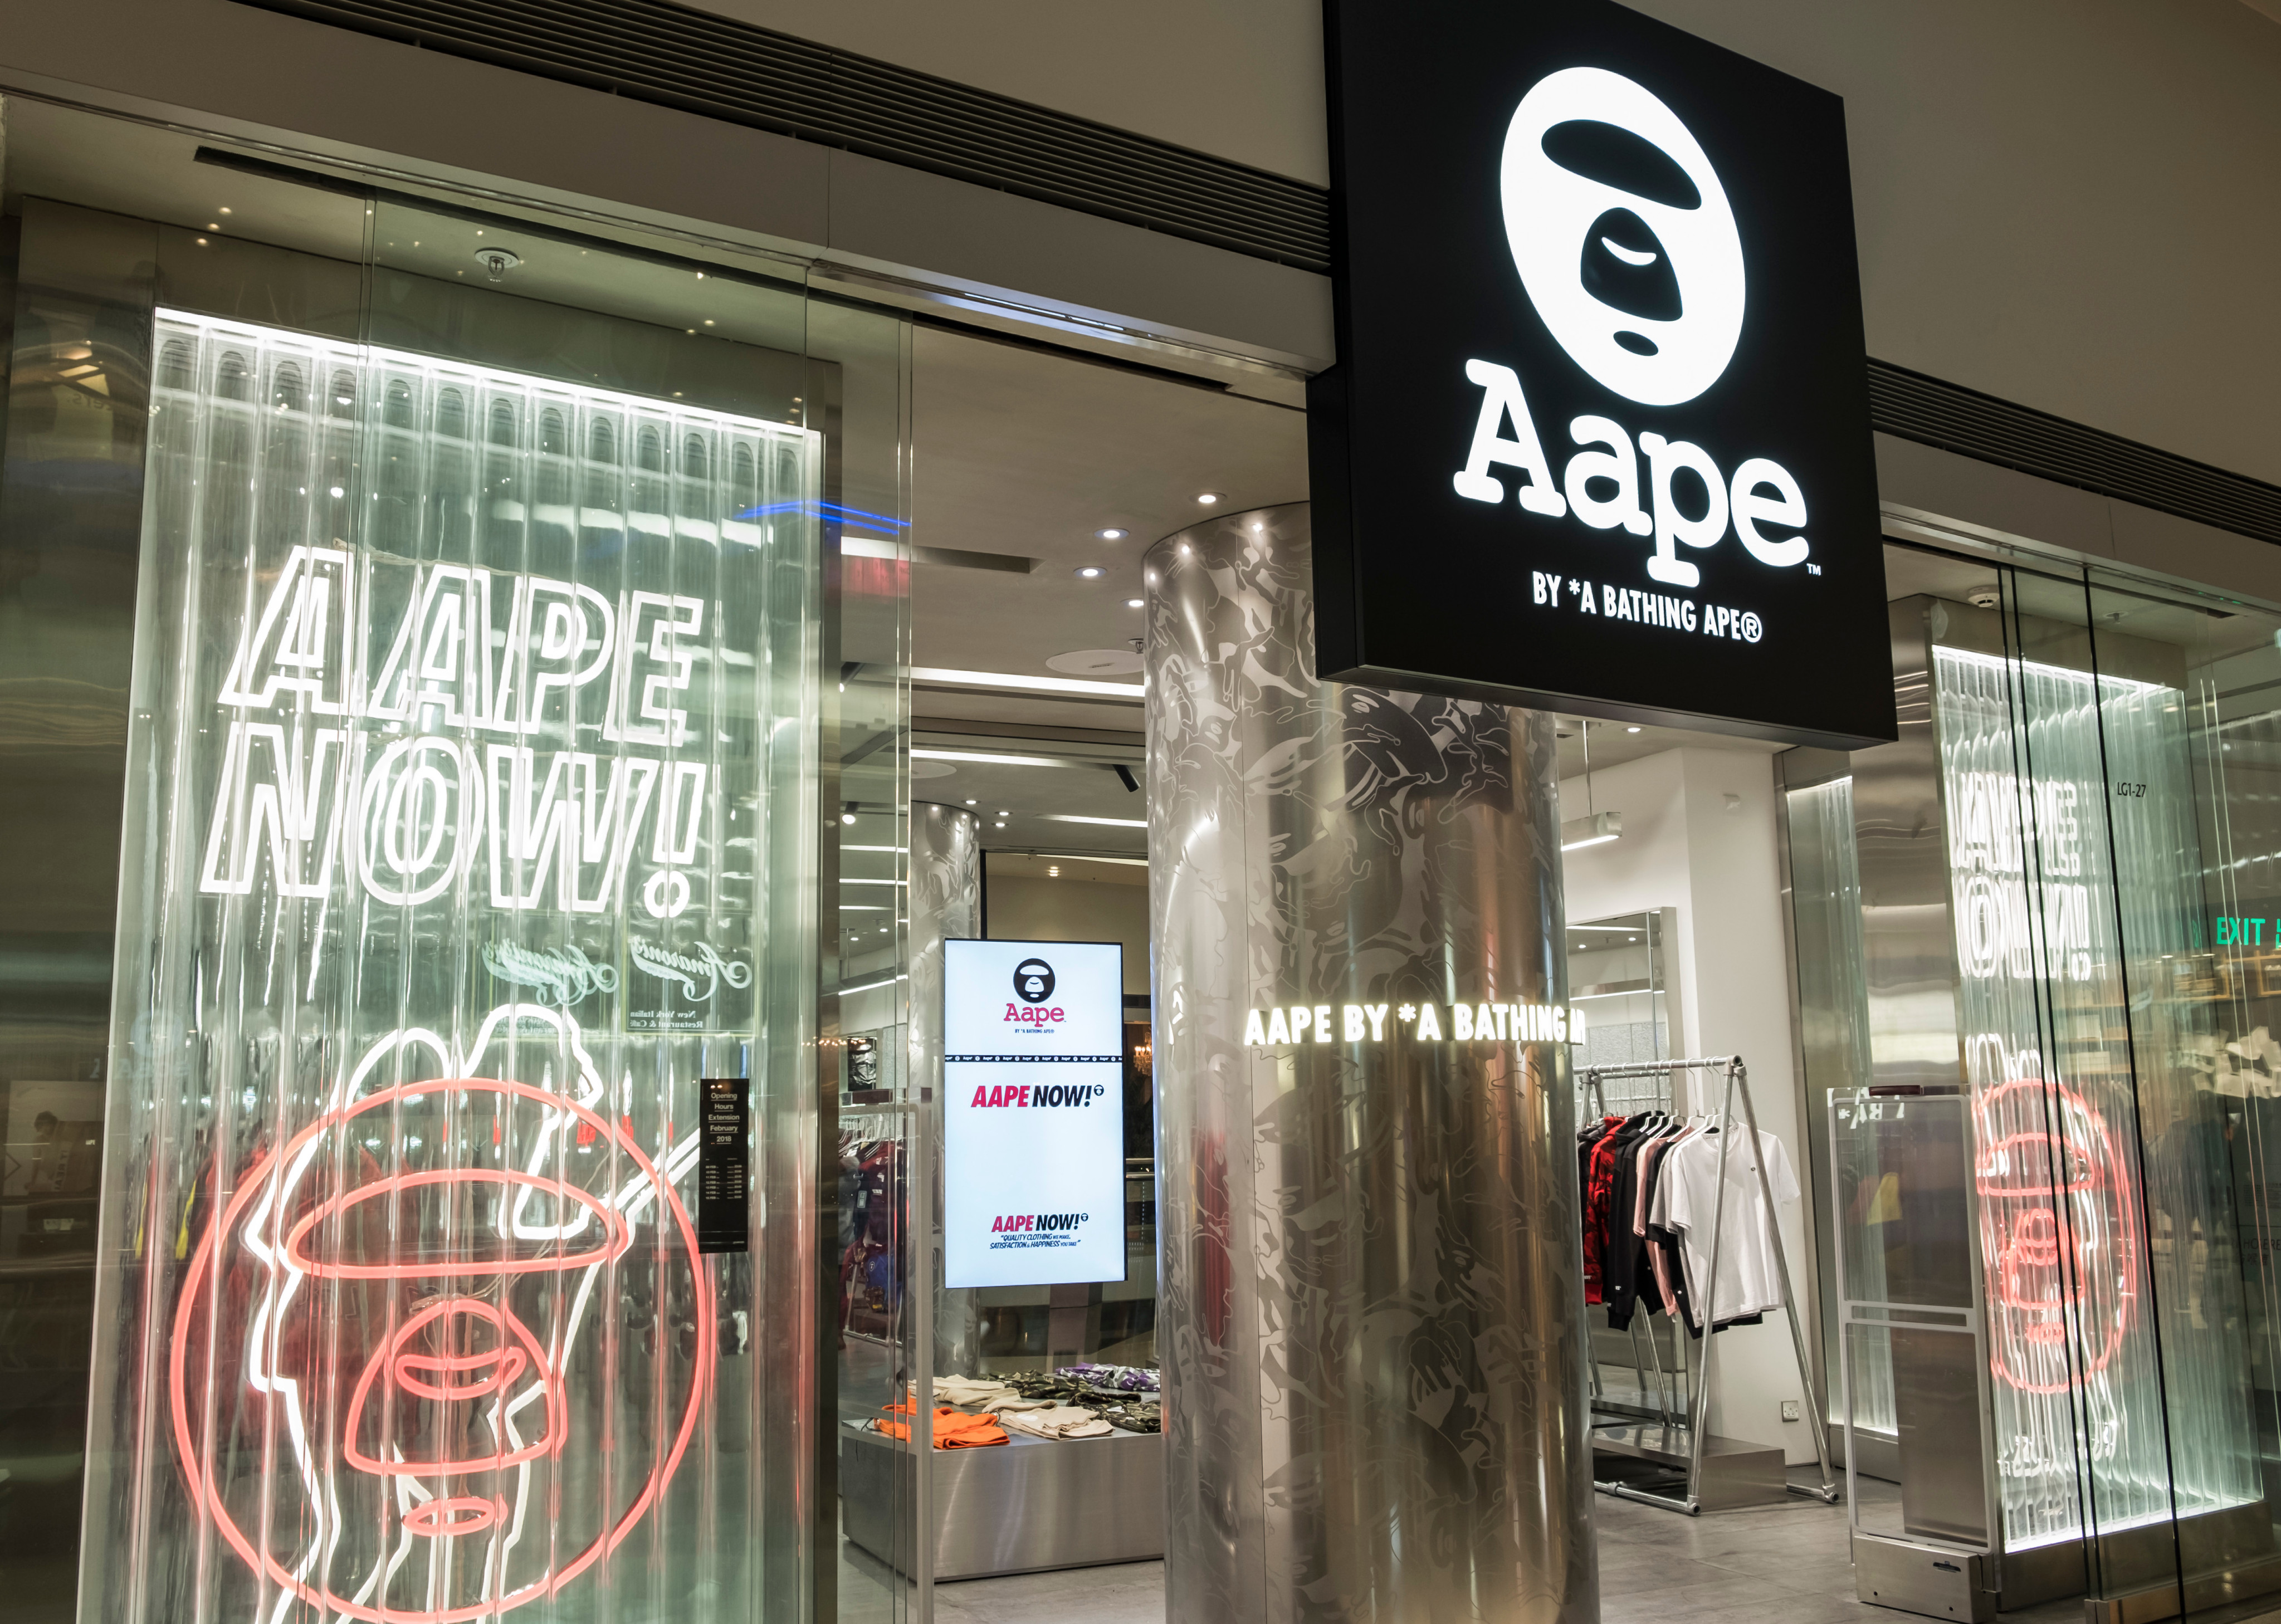 CVC Capital’s portfolio in the region includes A Bathing Ape, a Japanese streetwear brand active across 23 countries worldwide. Photo: Shutterstock